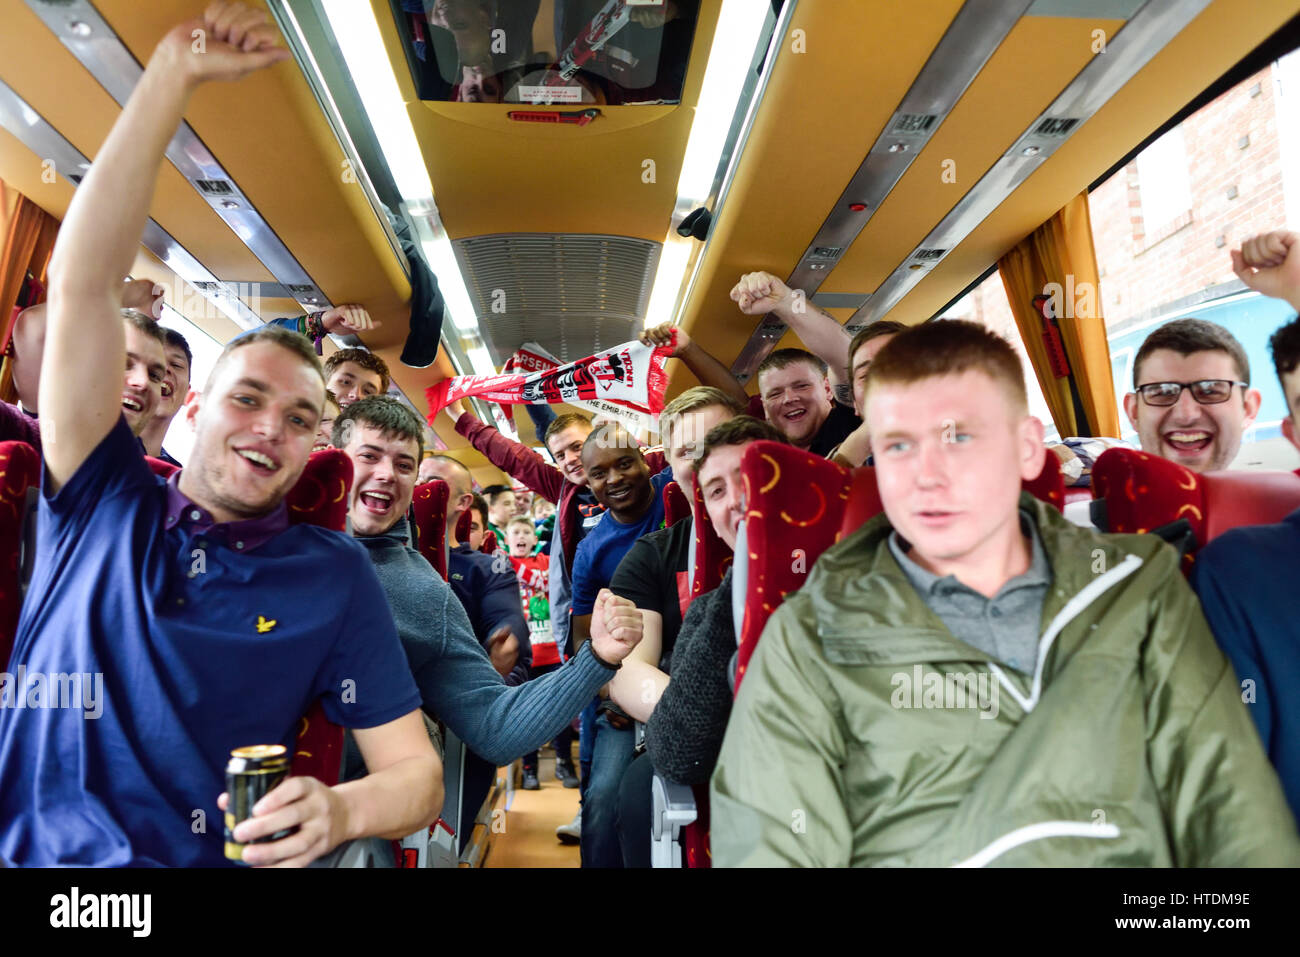 Lincoln, UK. 11th Mar, 2017. #Impvasion has begun Thousands of non-league Lincoln city fans making their way to the Emirates ground to take on Arsenal in the sixth round of the FA Cup. Credit: Ian Francis/Alamy Live News Stock Photo